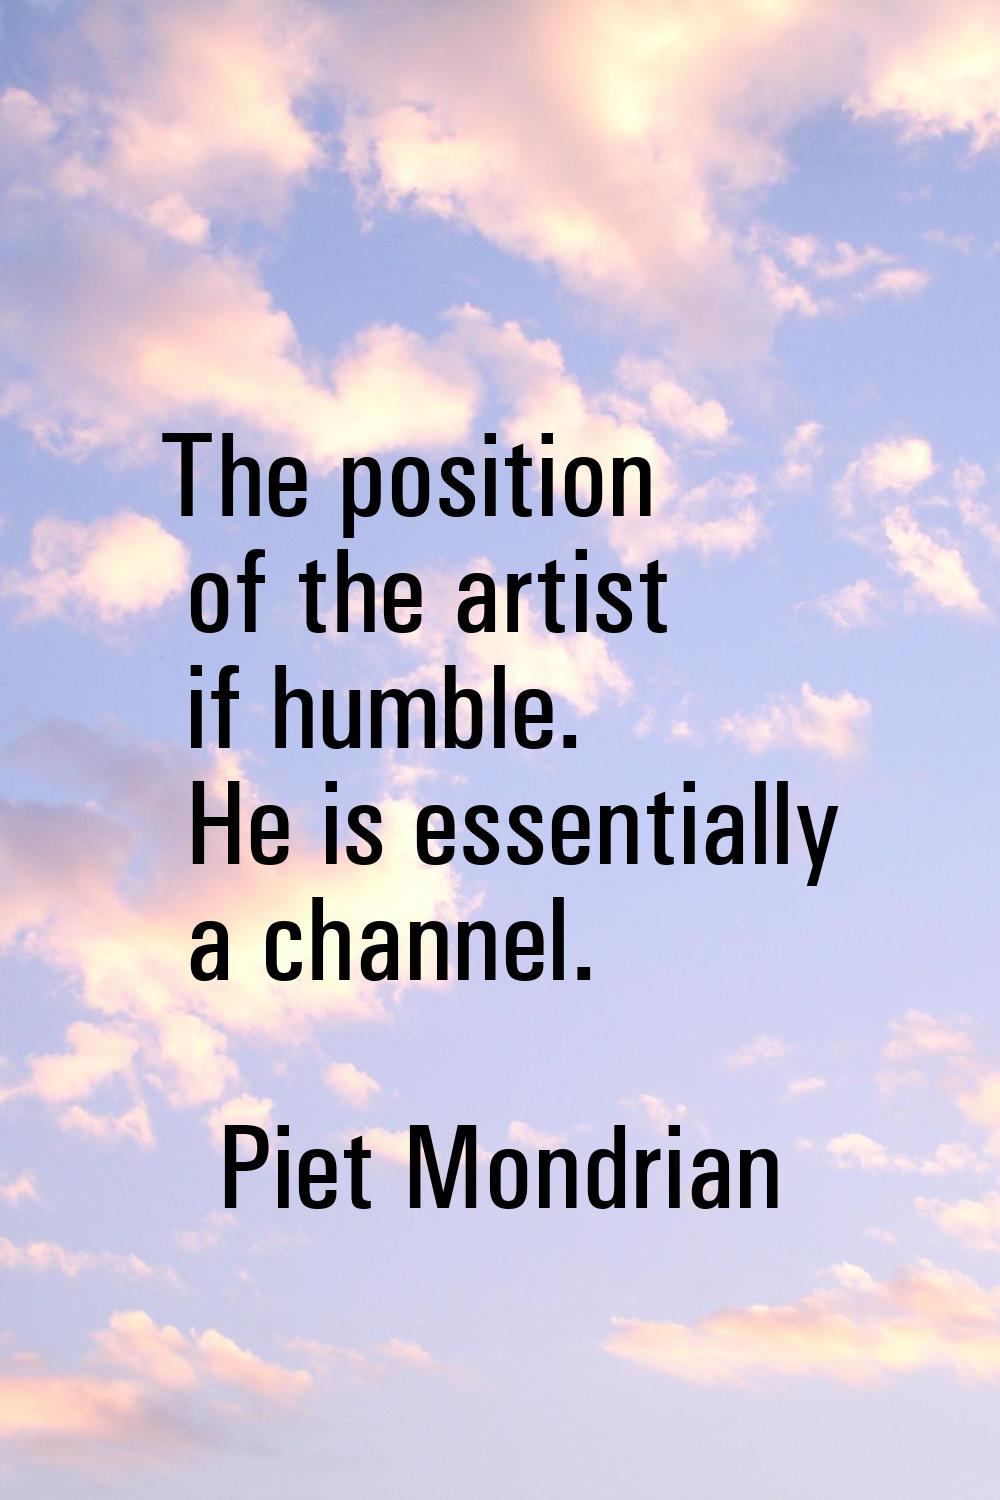 The position of the artist if humble. He is essentially a channel.